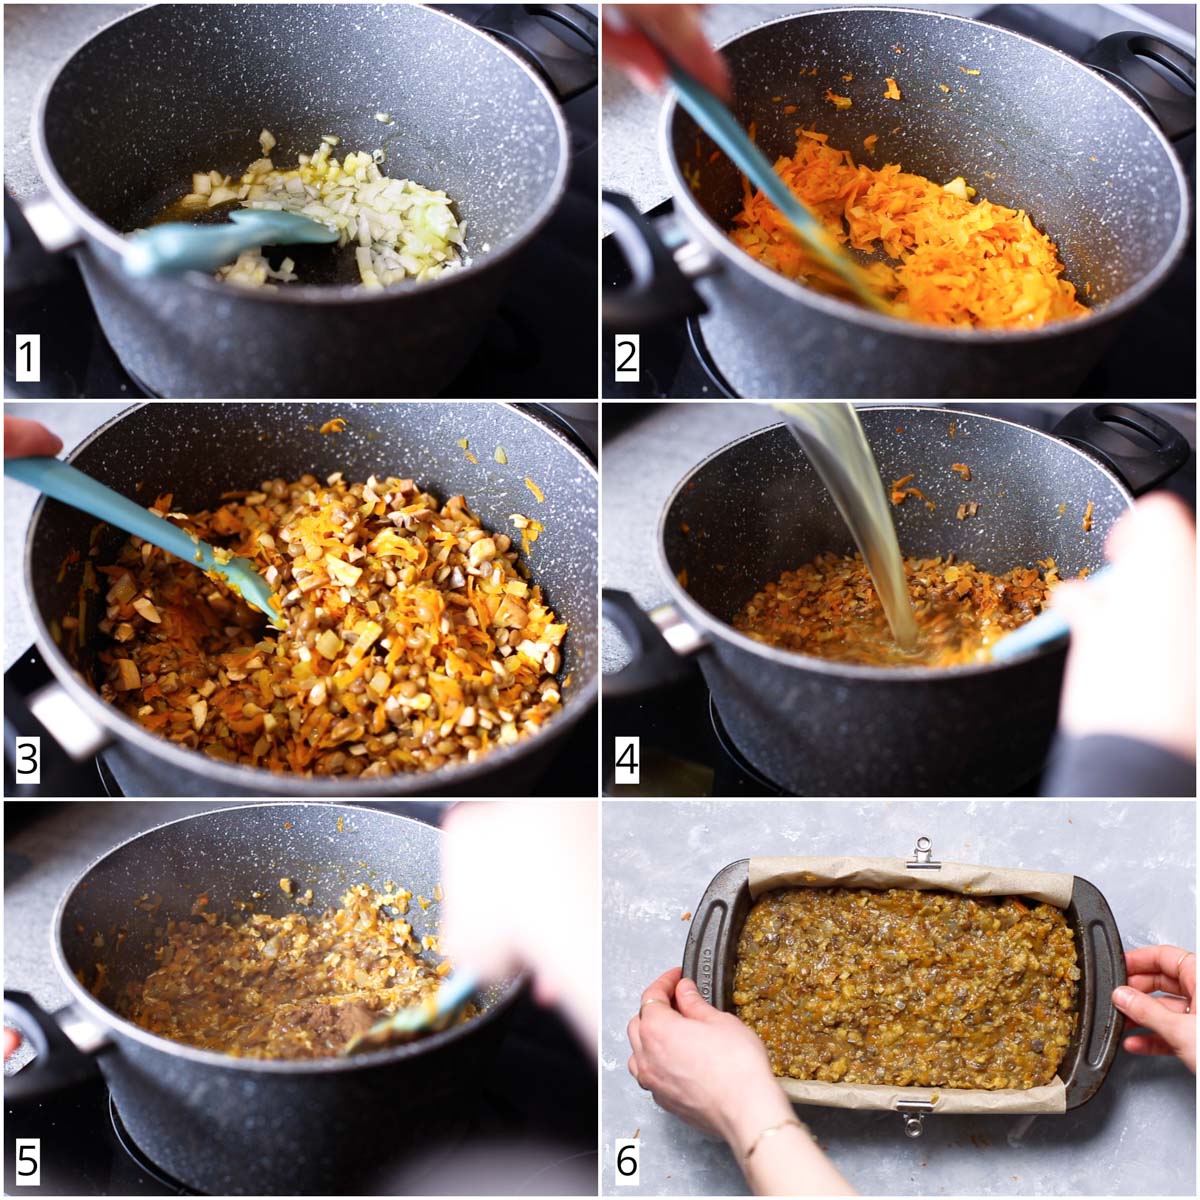 A collage of 6 images showing the 6 steps in making vegan haggis.